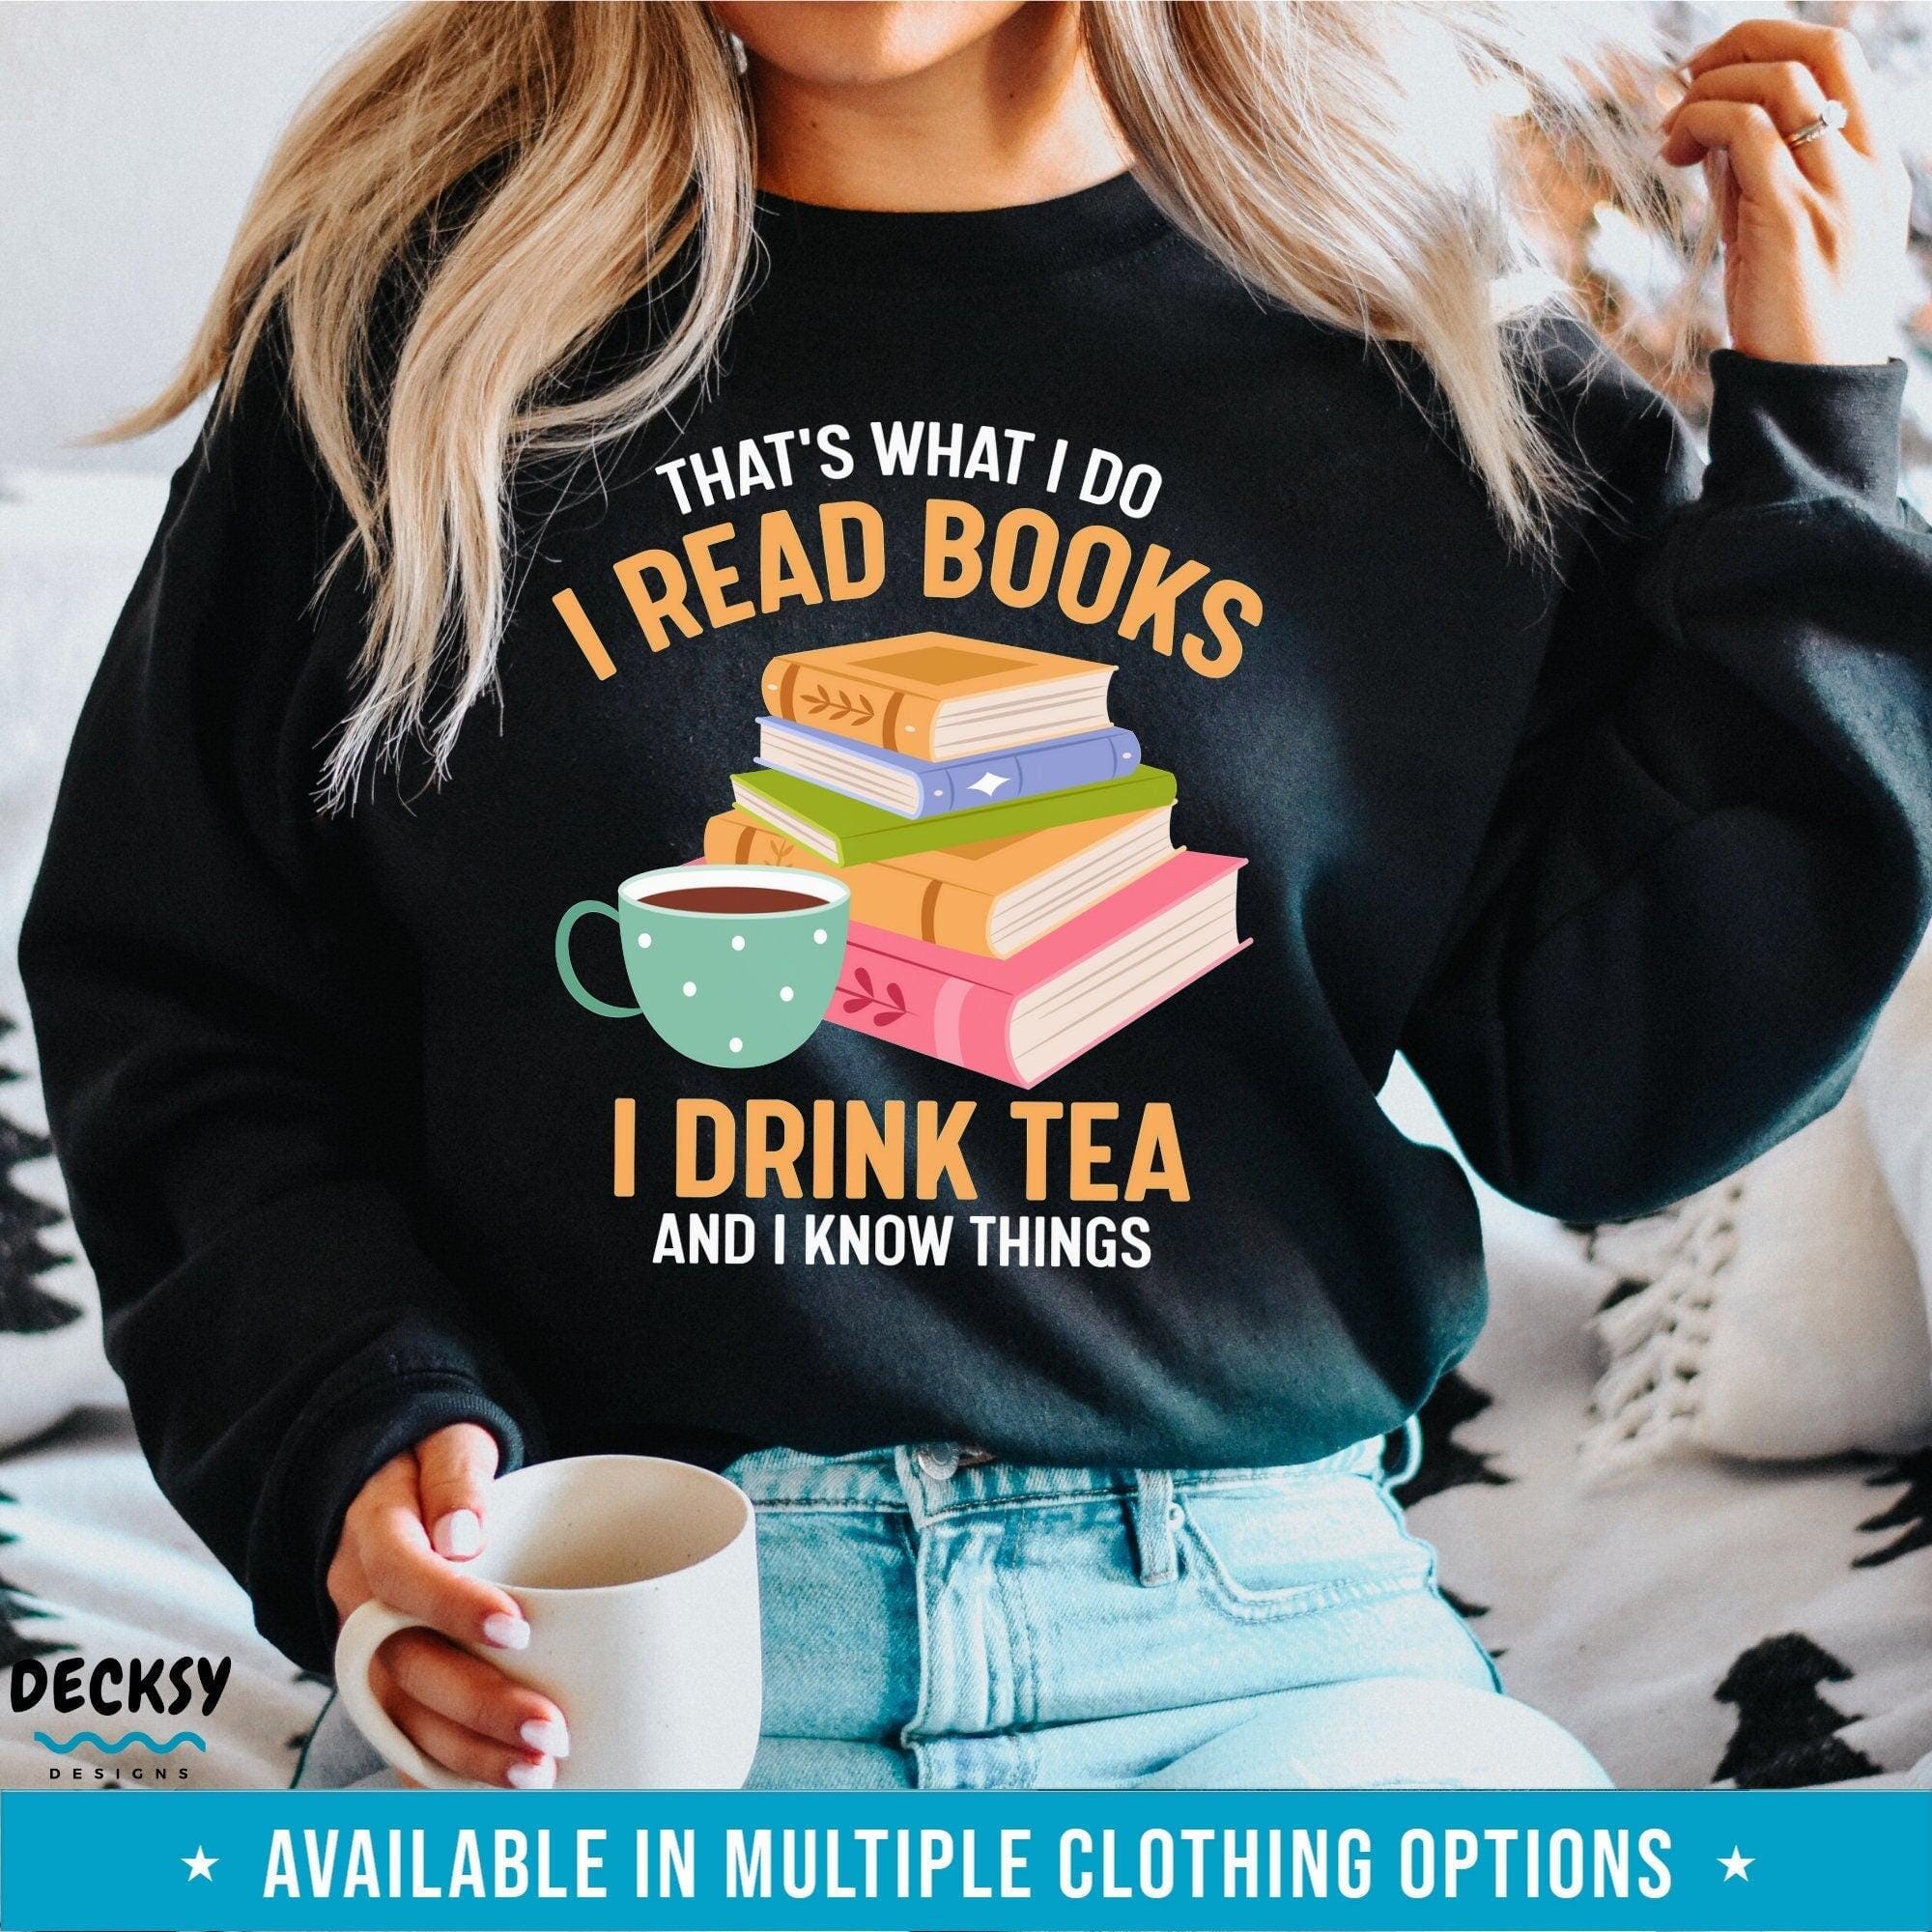 Book Reader Shirt, Gift For Tea Lover-Clothing:Gender-Neutral Adult Clothing:Tops & Tees:T-shirts:Graphic Tees-DecksyDesigns